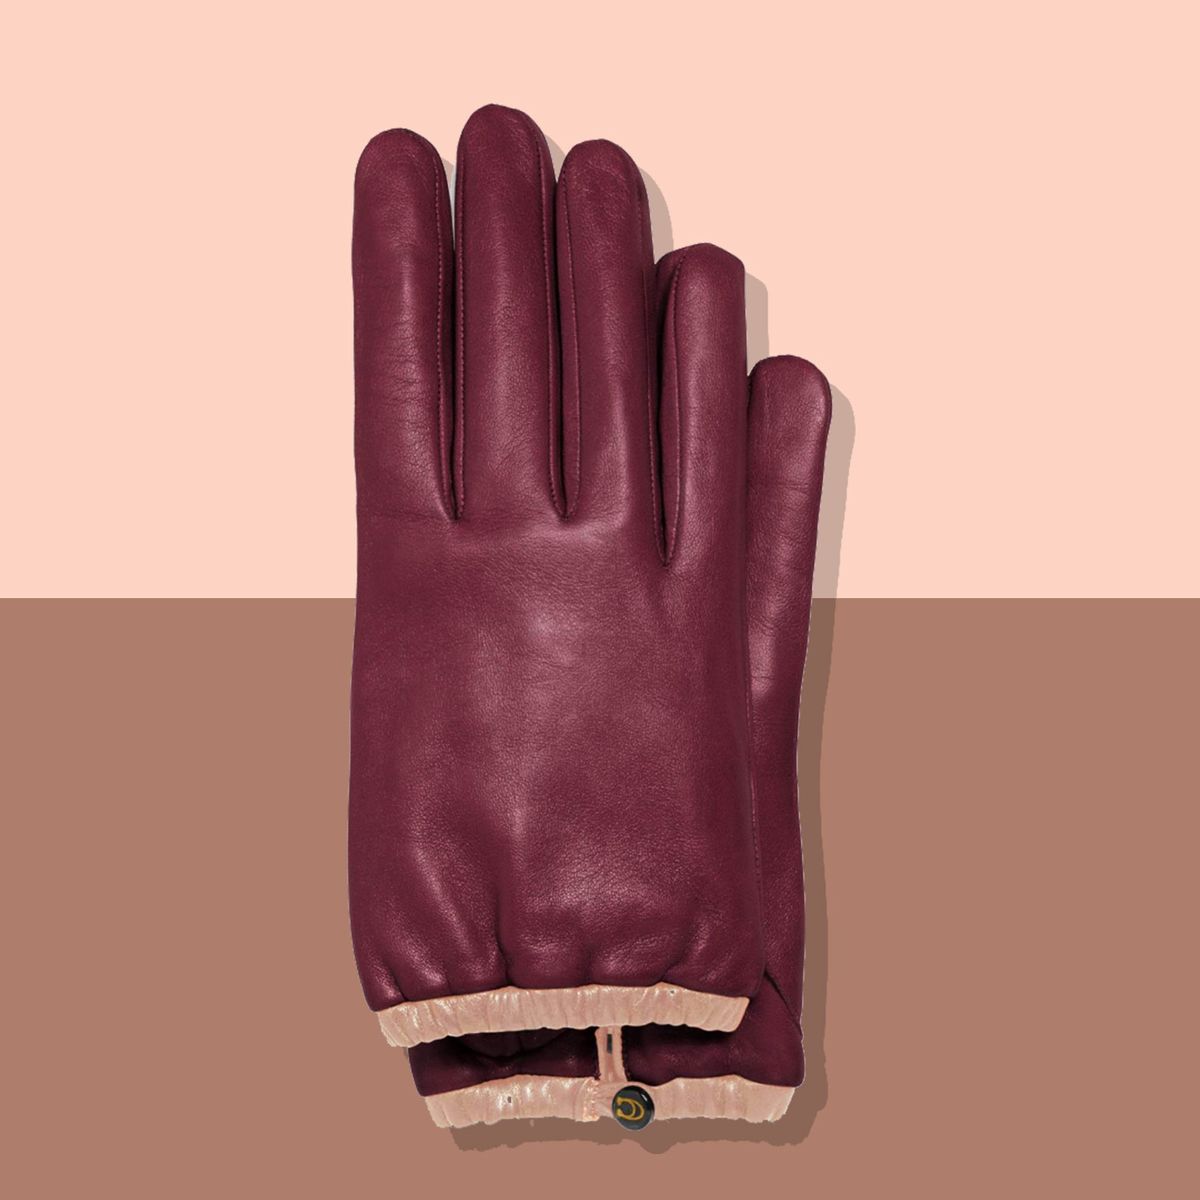 Coach Leather Gloves Sale 2020 | The Strategist